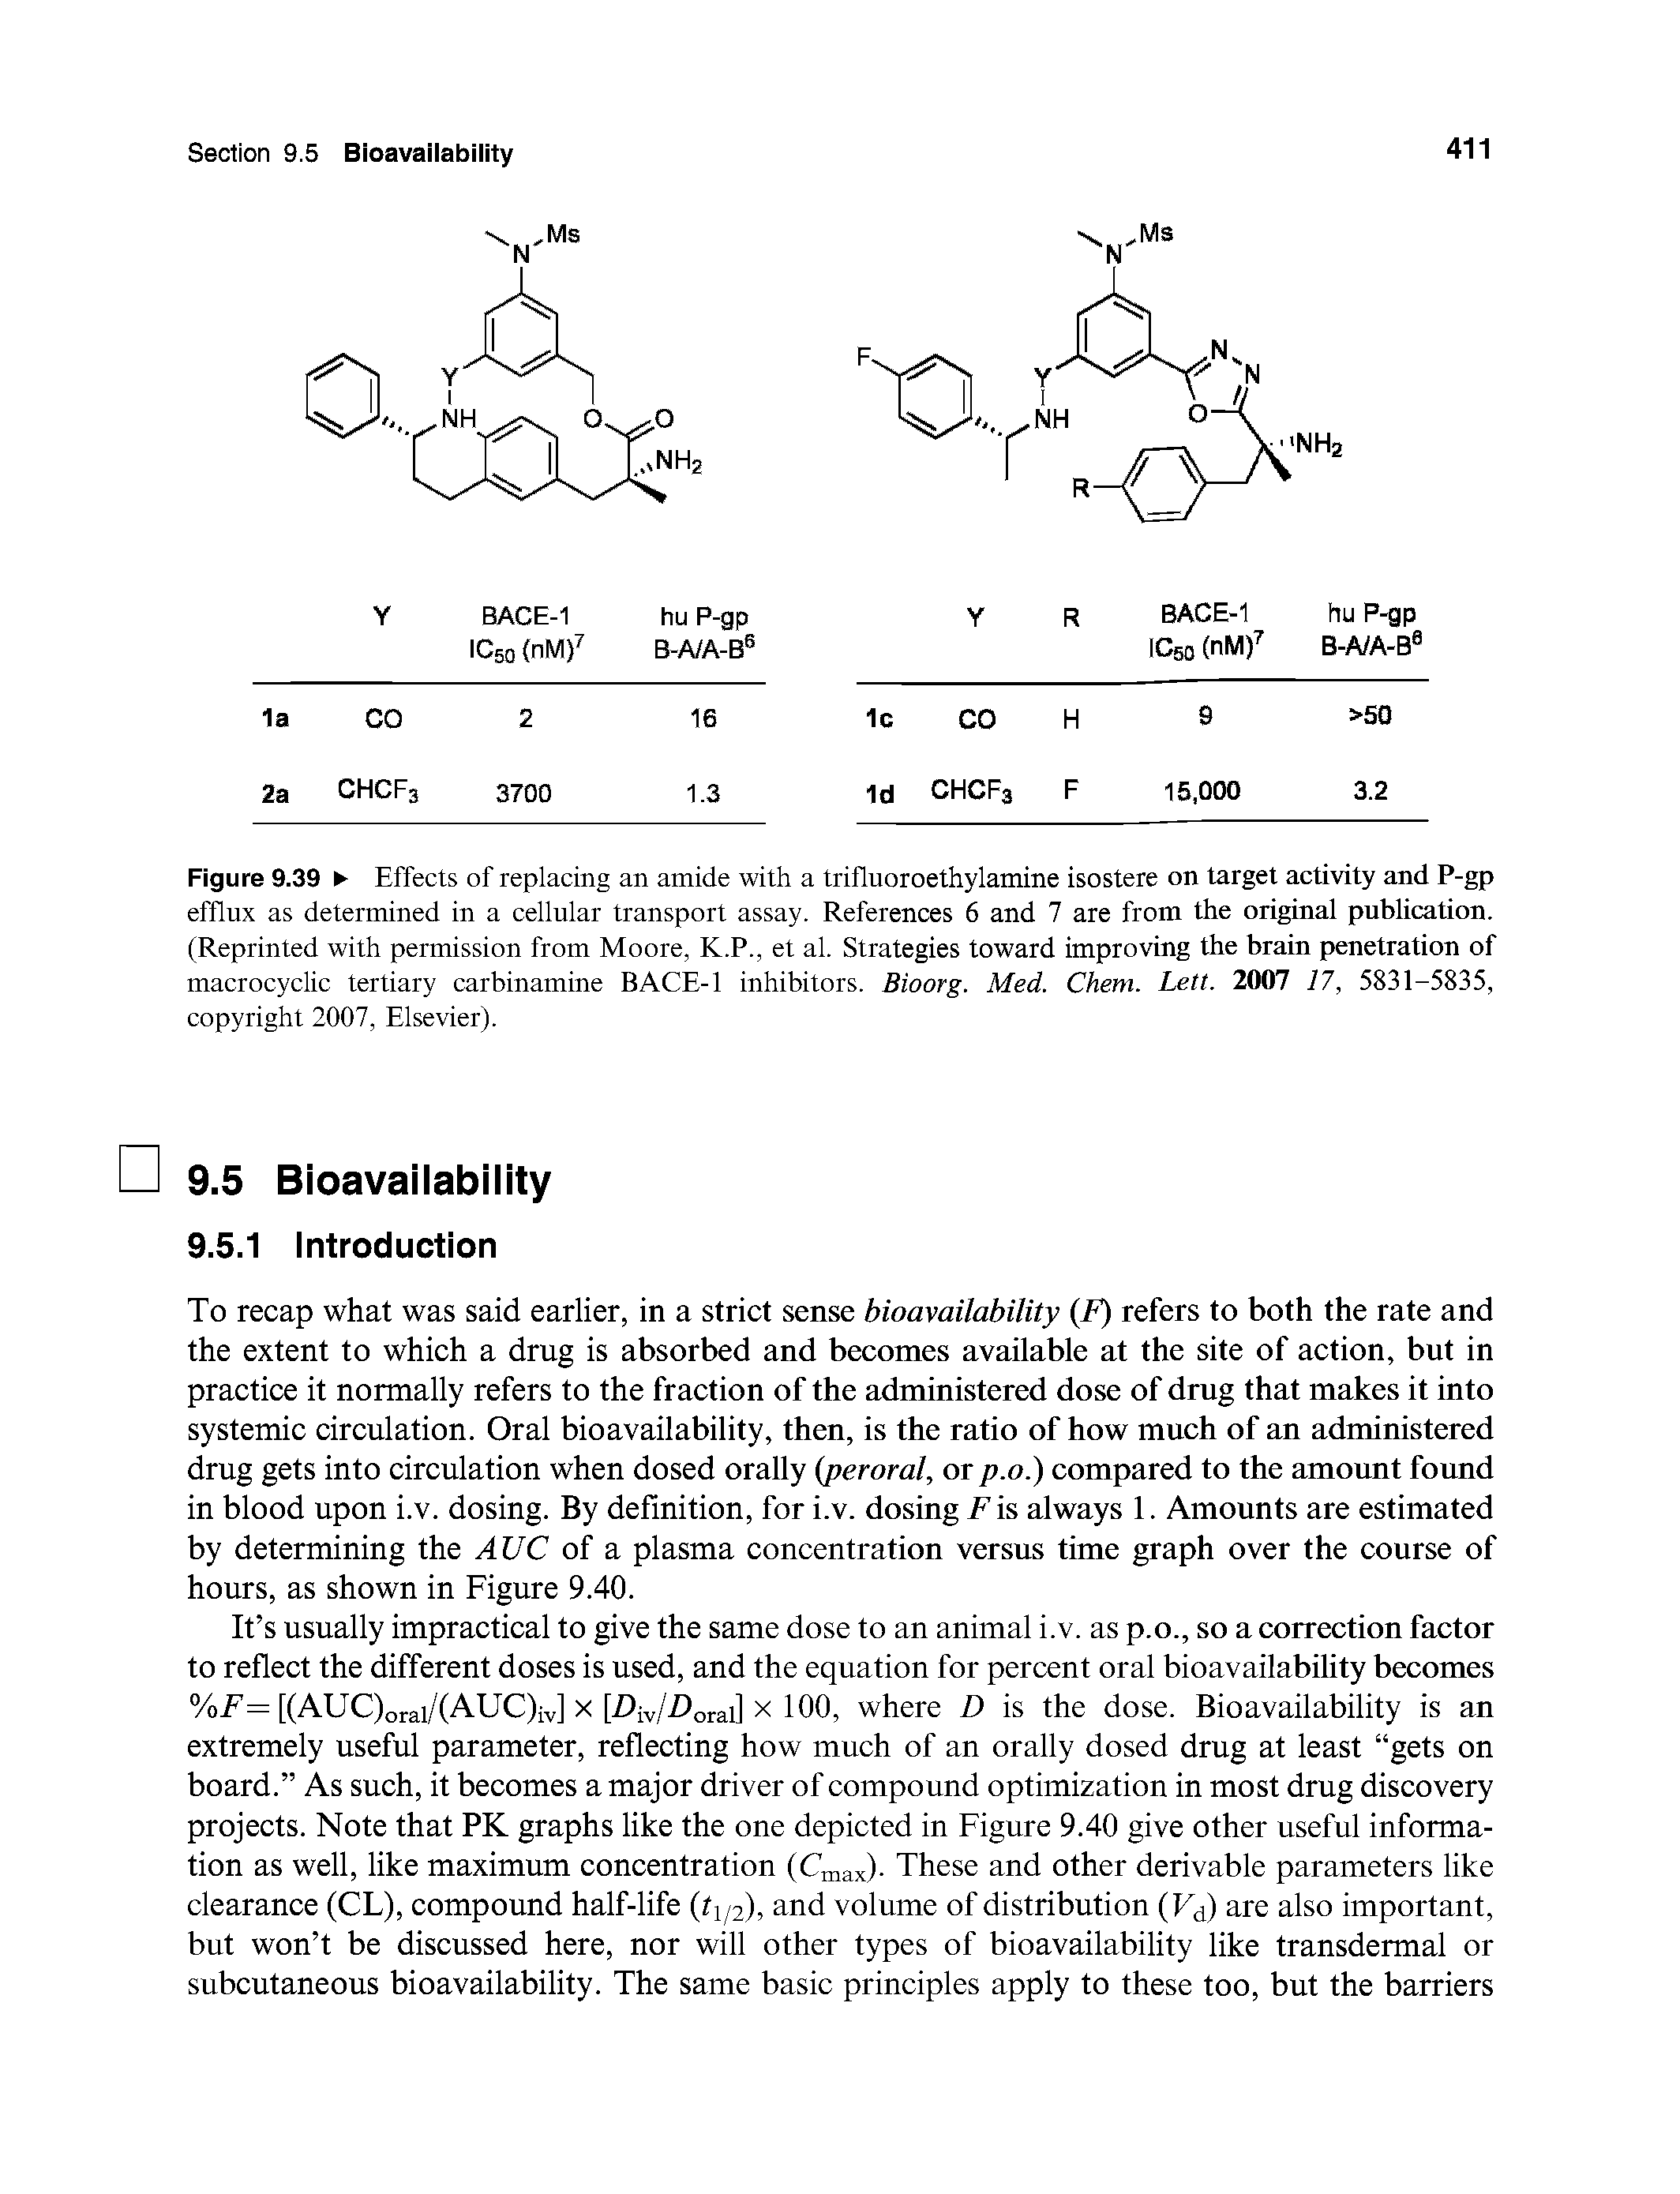 Figure 9.39 Effects of replacing an amide with a trifluoroethylamine isostere on target activity and P-gp efflux as determined in a cellular transport assay. References 6 and 7 are from the original publication. (Reprinted with permission from Moore, K.P., et al. Strategies toward improving the brain penetration of macrocyclic tertiary carbinamine BACE-1 inhibitors. Bioorg. Med. Chem. Lett. 2007 17, 5831-5835, copyright 2007, Elsevier).